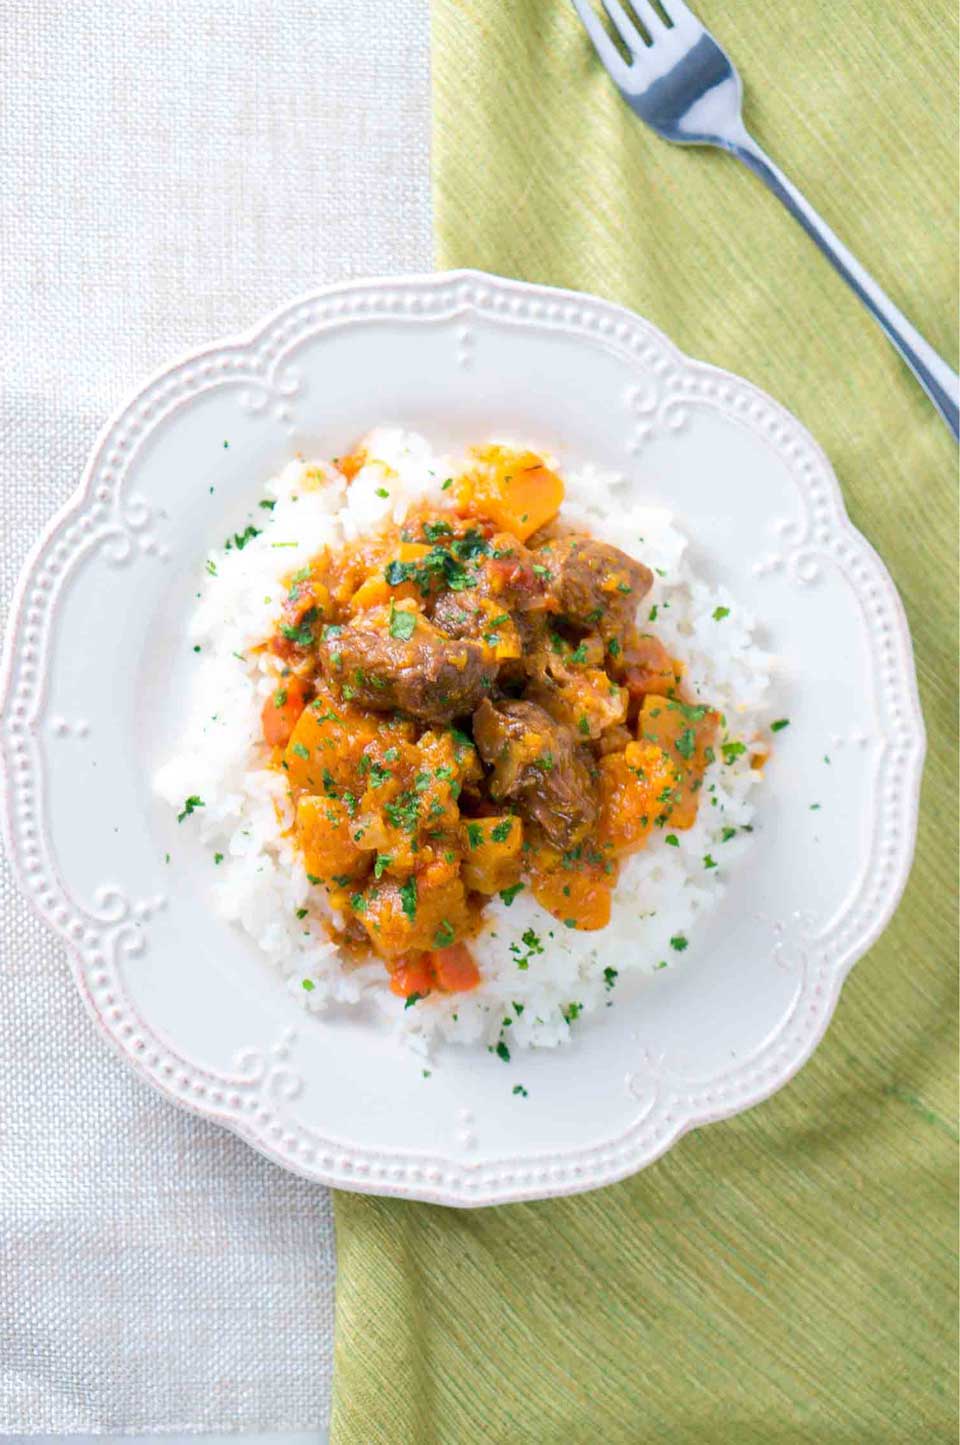 Beef stew recipes can be healthier choices! We’ve got strategies and recipes to help, like the Beef and Butternut Squash Stew from Neli at Delicious Meets Healthy.